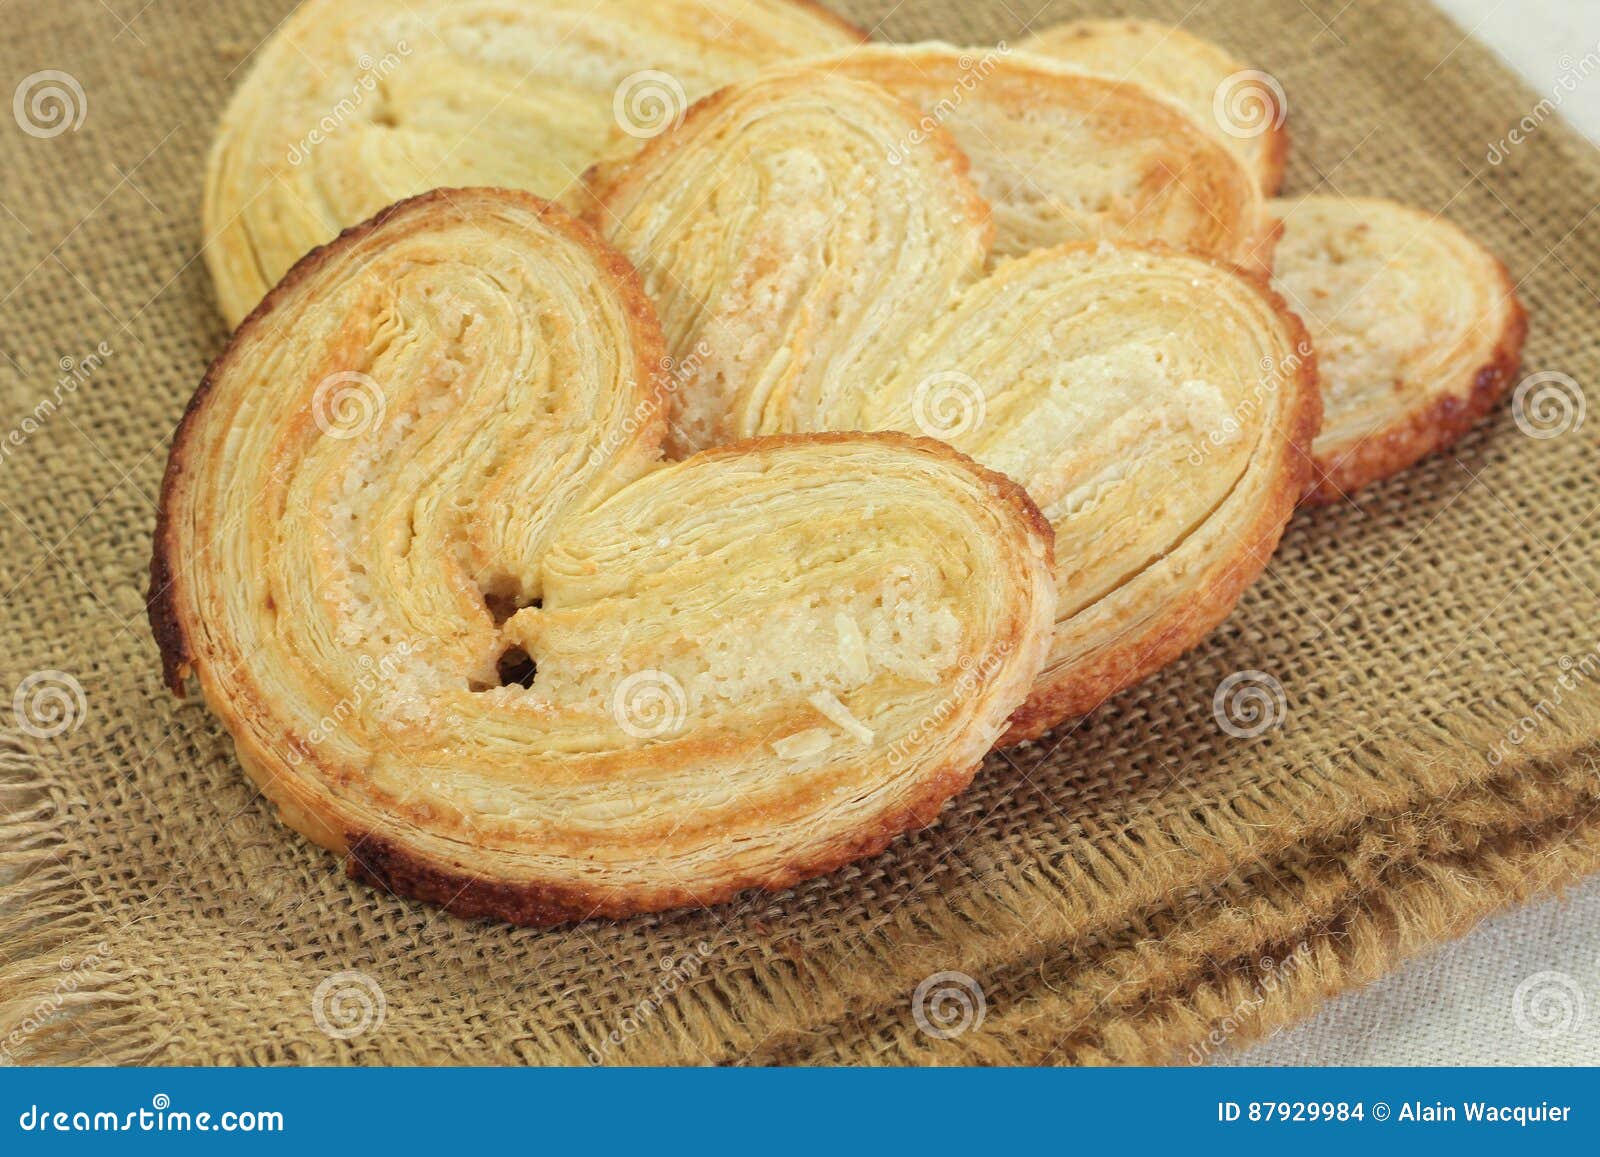 palmera palmier sweet puff pastry